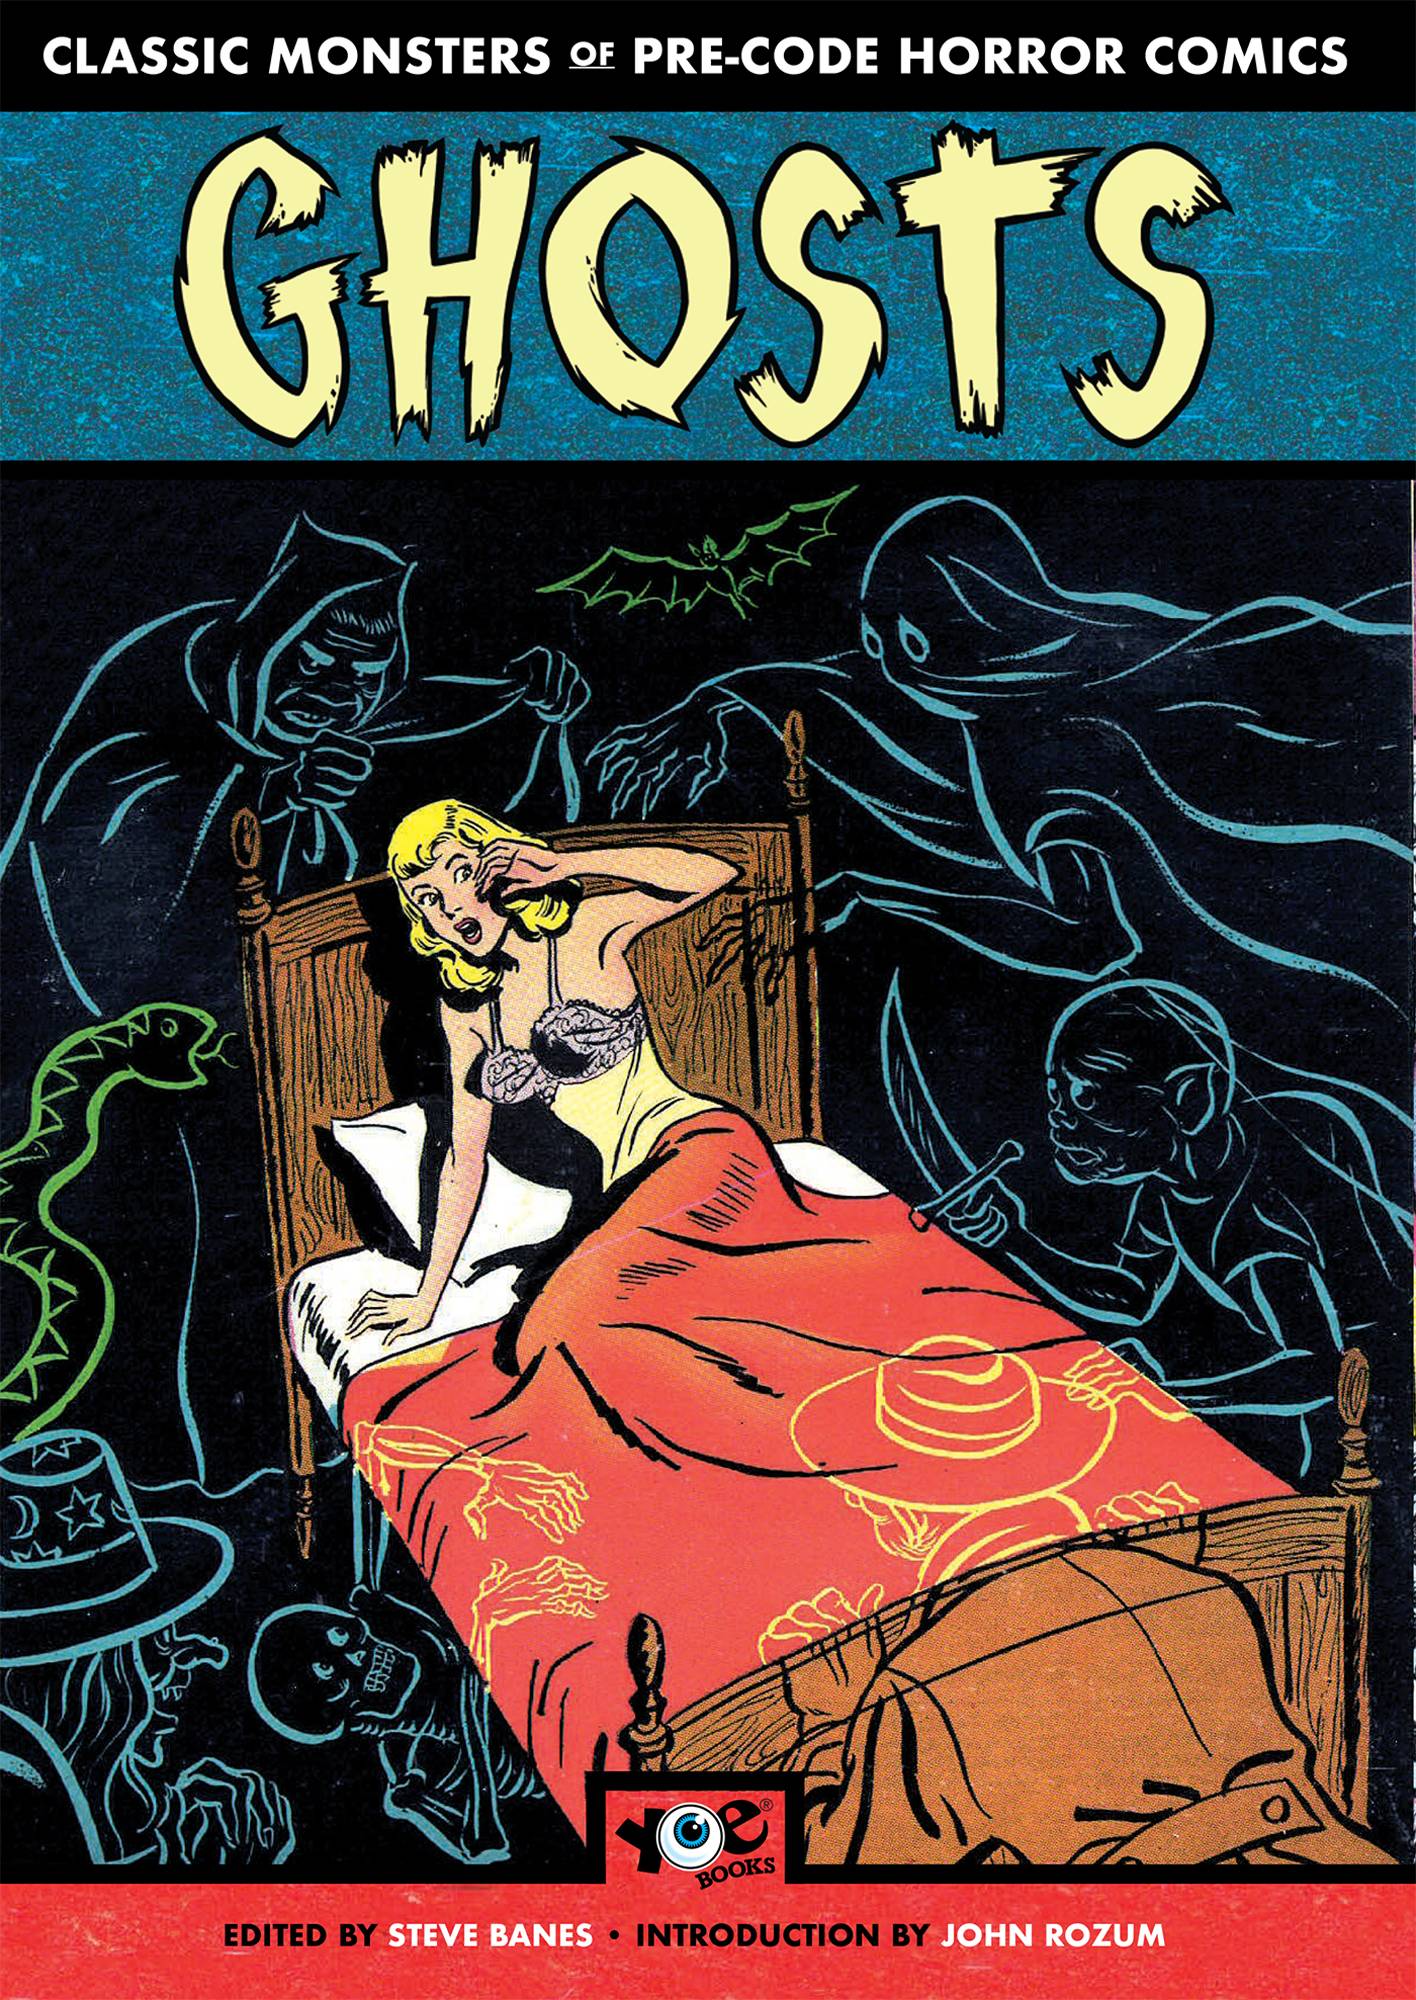 Classic Monsters of Pre-Code Horror Comics: Ghosts Trade Paperback